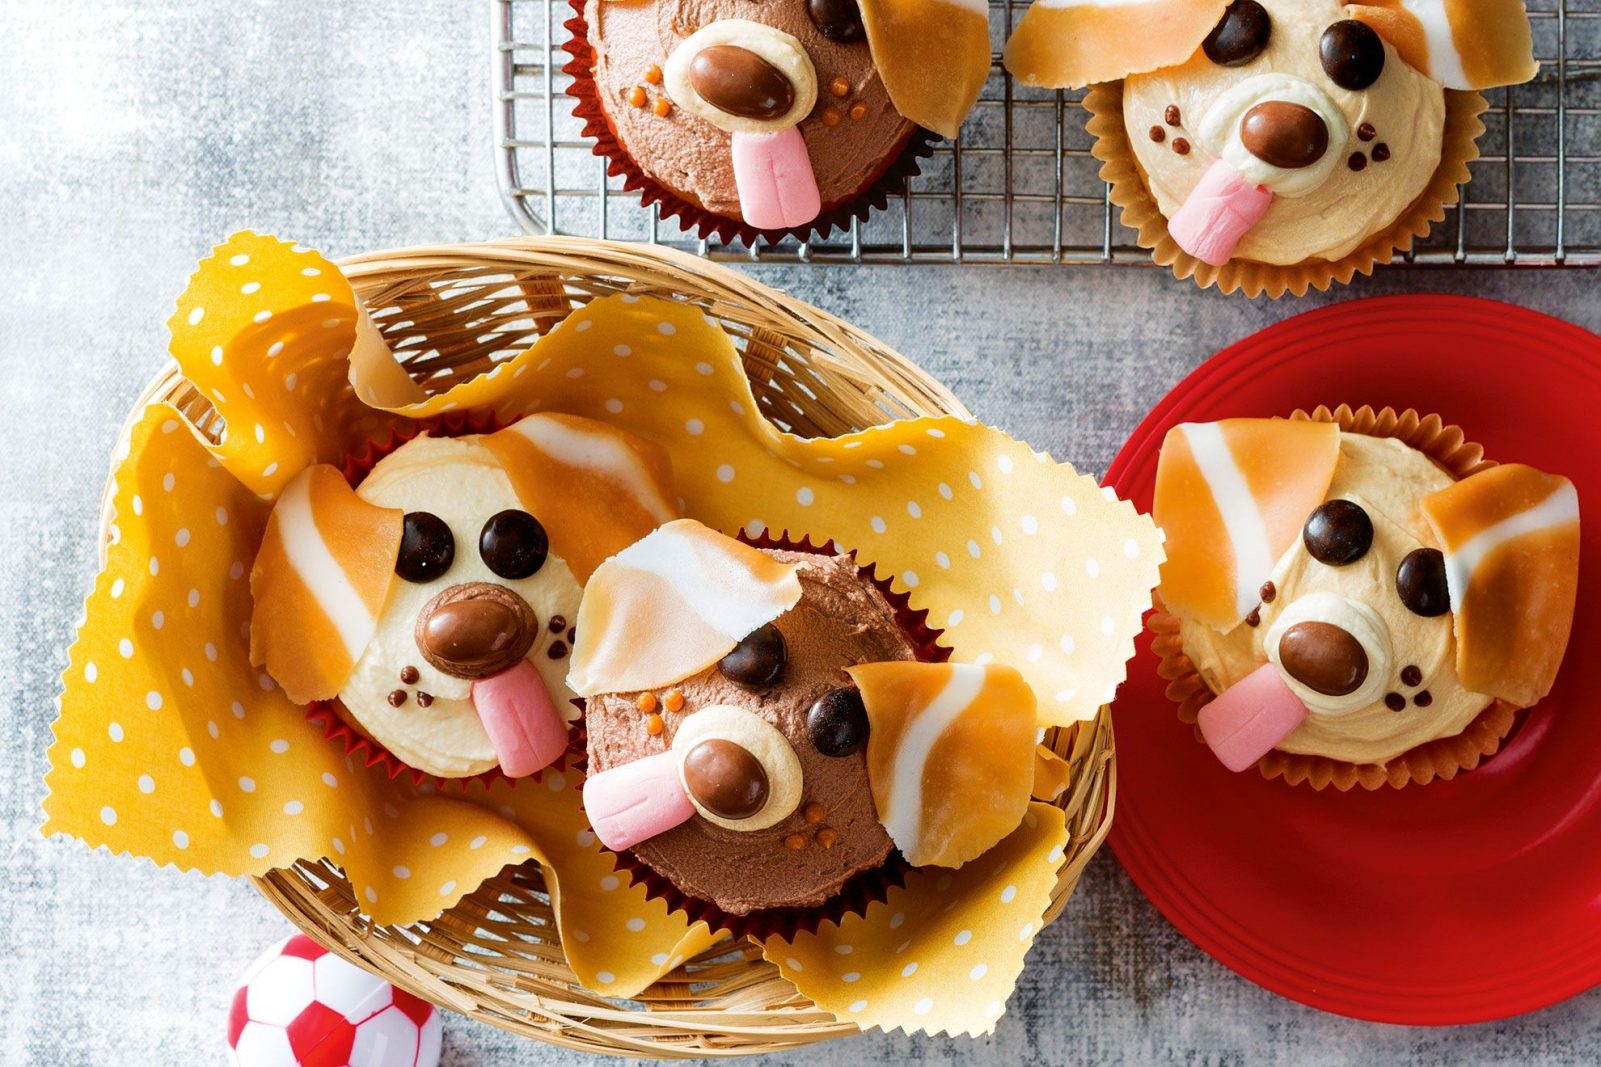 What Dog Breed And Cat Breed Are You A Combo Of? Quiz pupcakes